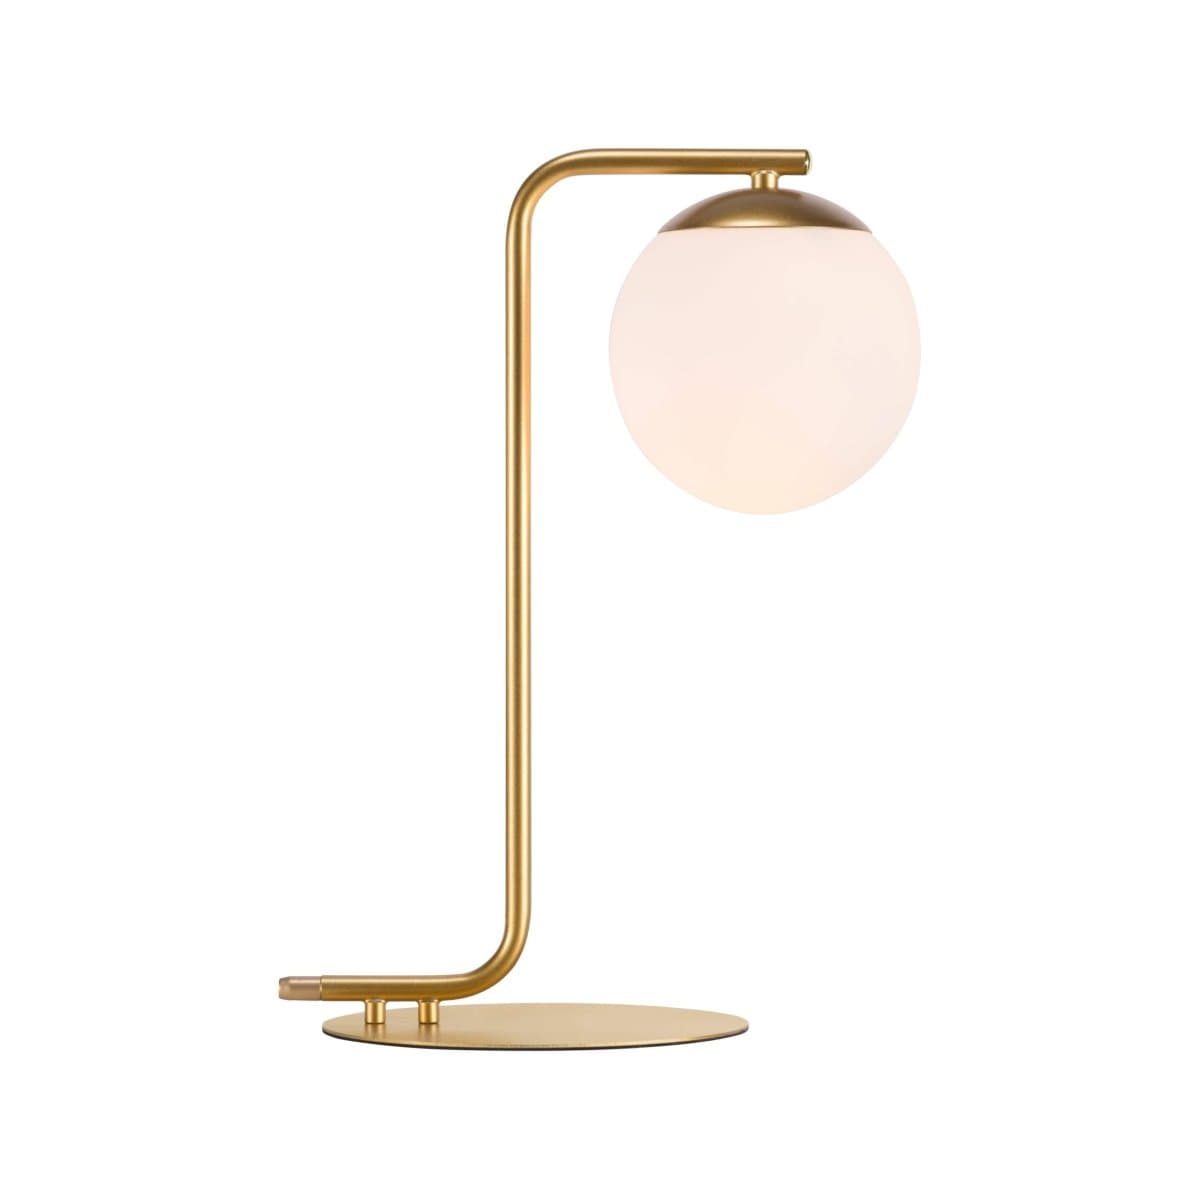 Nordlux Table Lamp Grant Table Lamp, black or brass